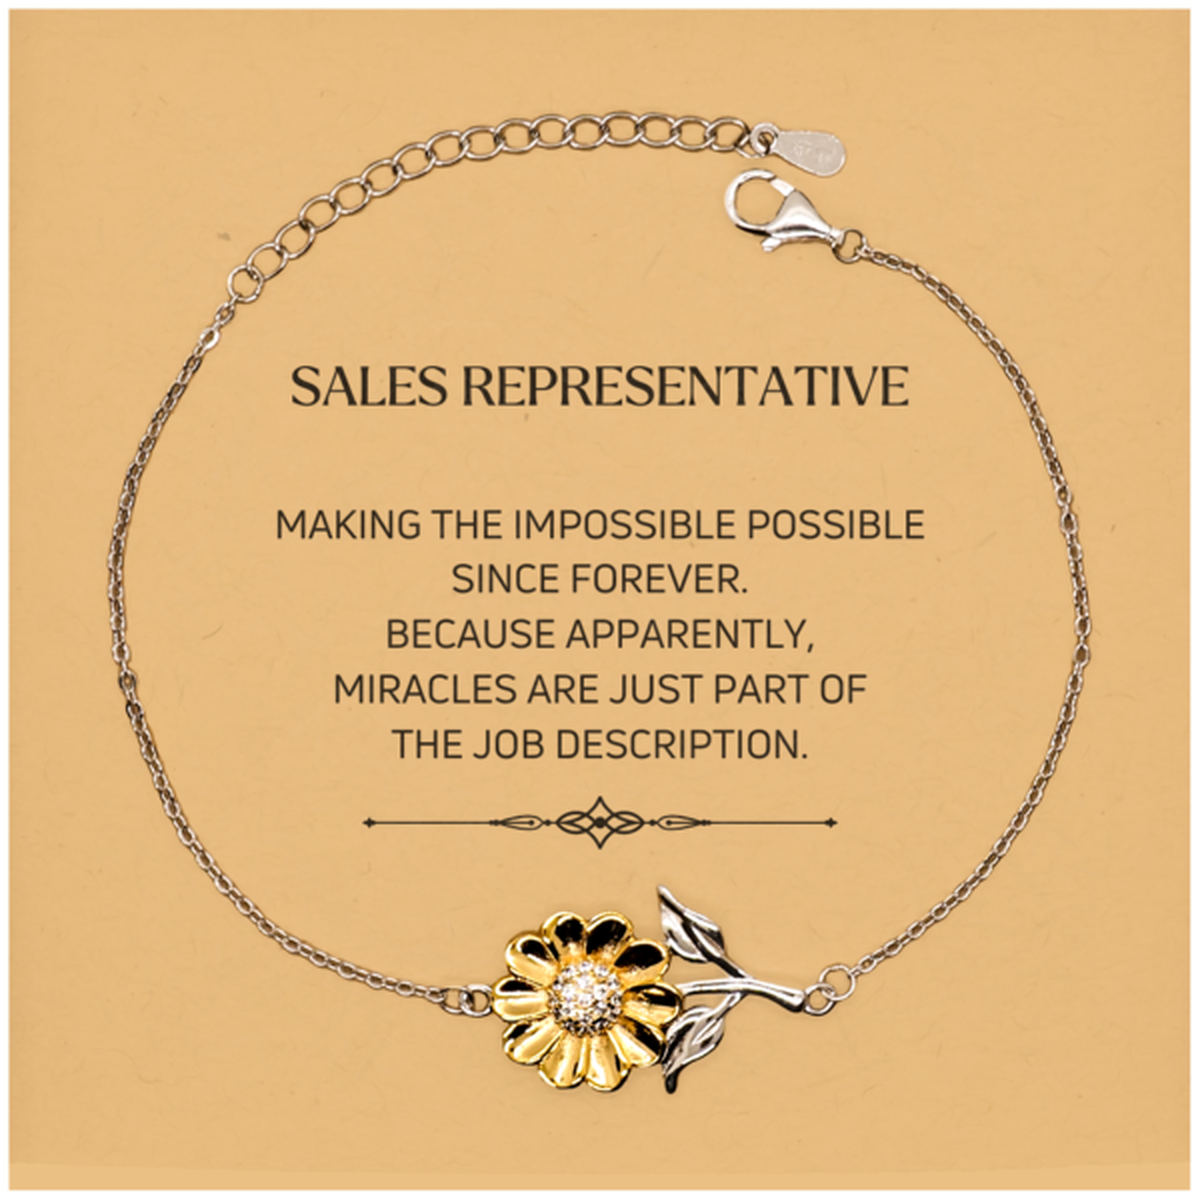 Funny Sales Representative Gifts, Miracles are just part of the job description, Inspirational Birthday Christmas Sunflower Bracelet For Sales Representative, Men, Women, Coworkers, Friends, Boss